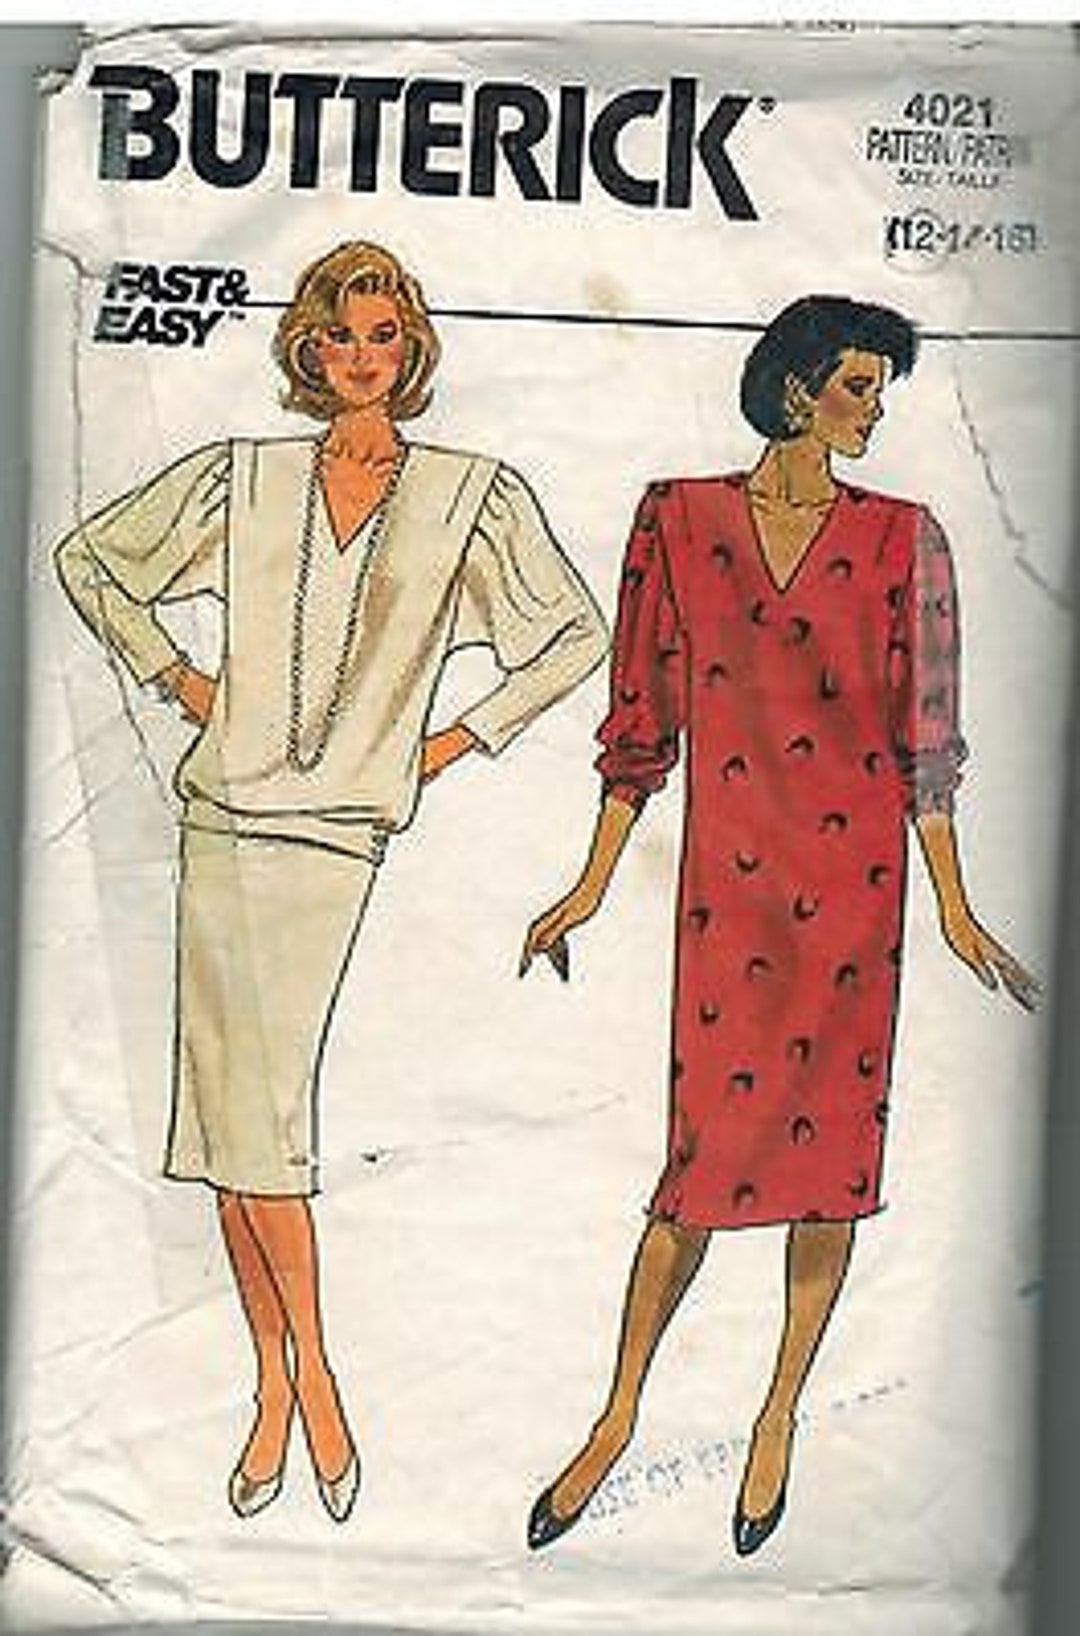 4021 Vintage Butterick Sewing Pattern Misses Dress Top Skirt Fast Easy ...